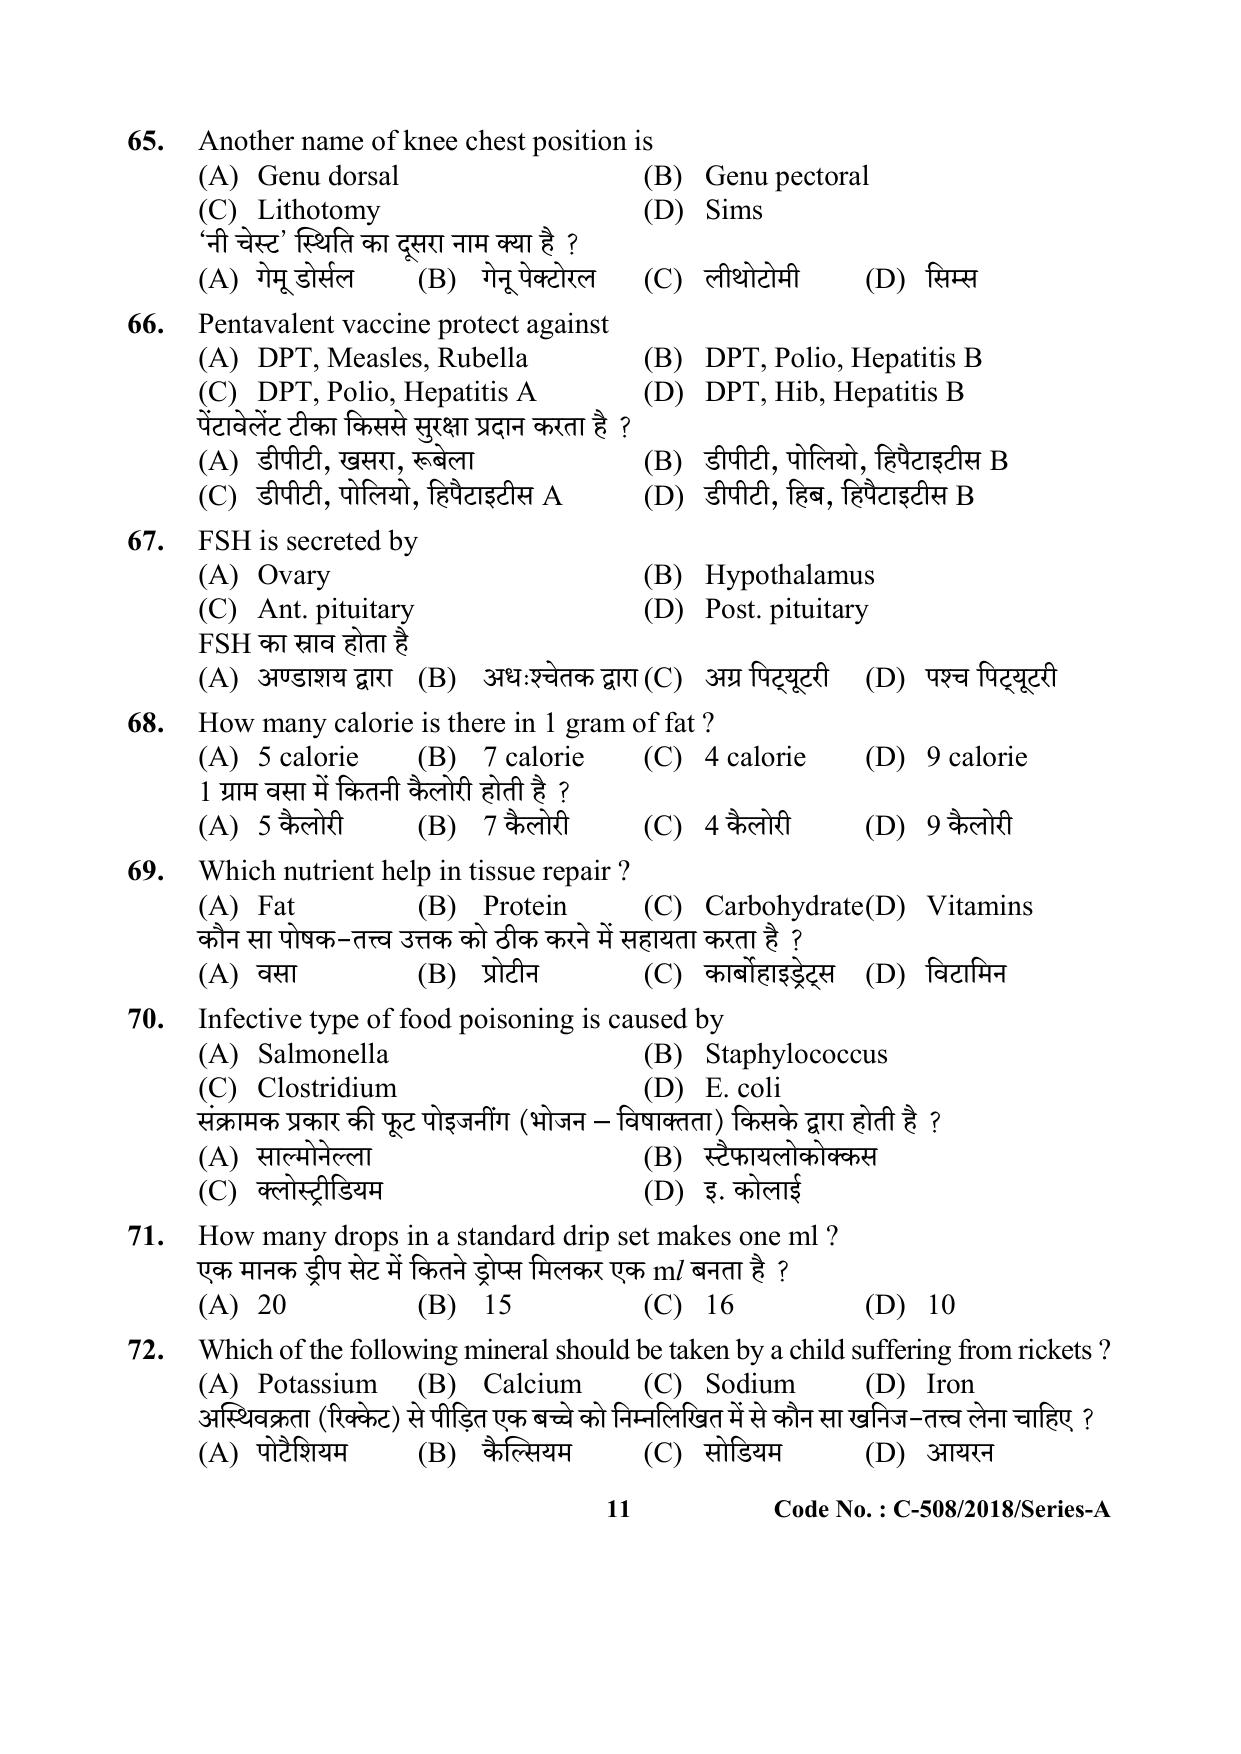 UP Health Worker Thematic Knowledge Previous Year Question Paper - Page 11